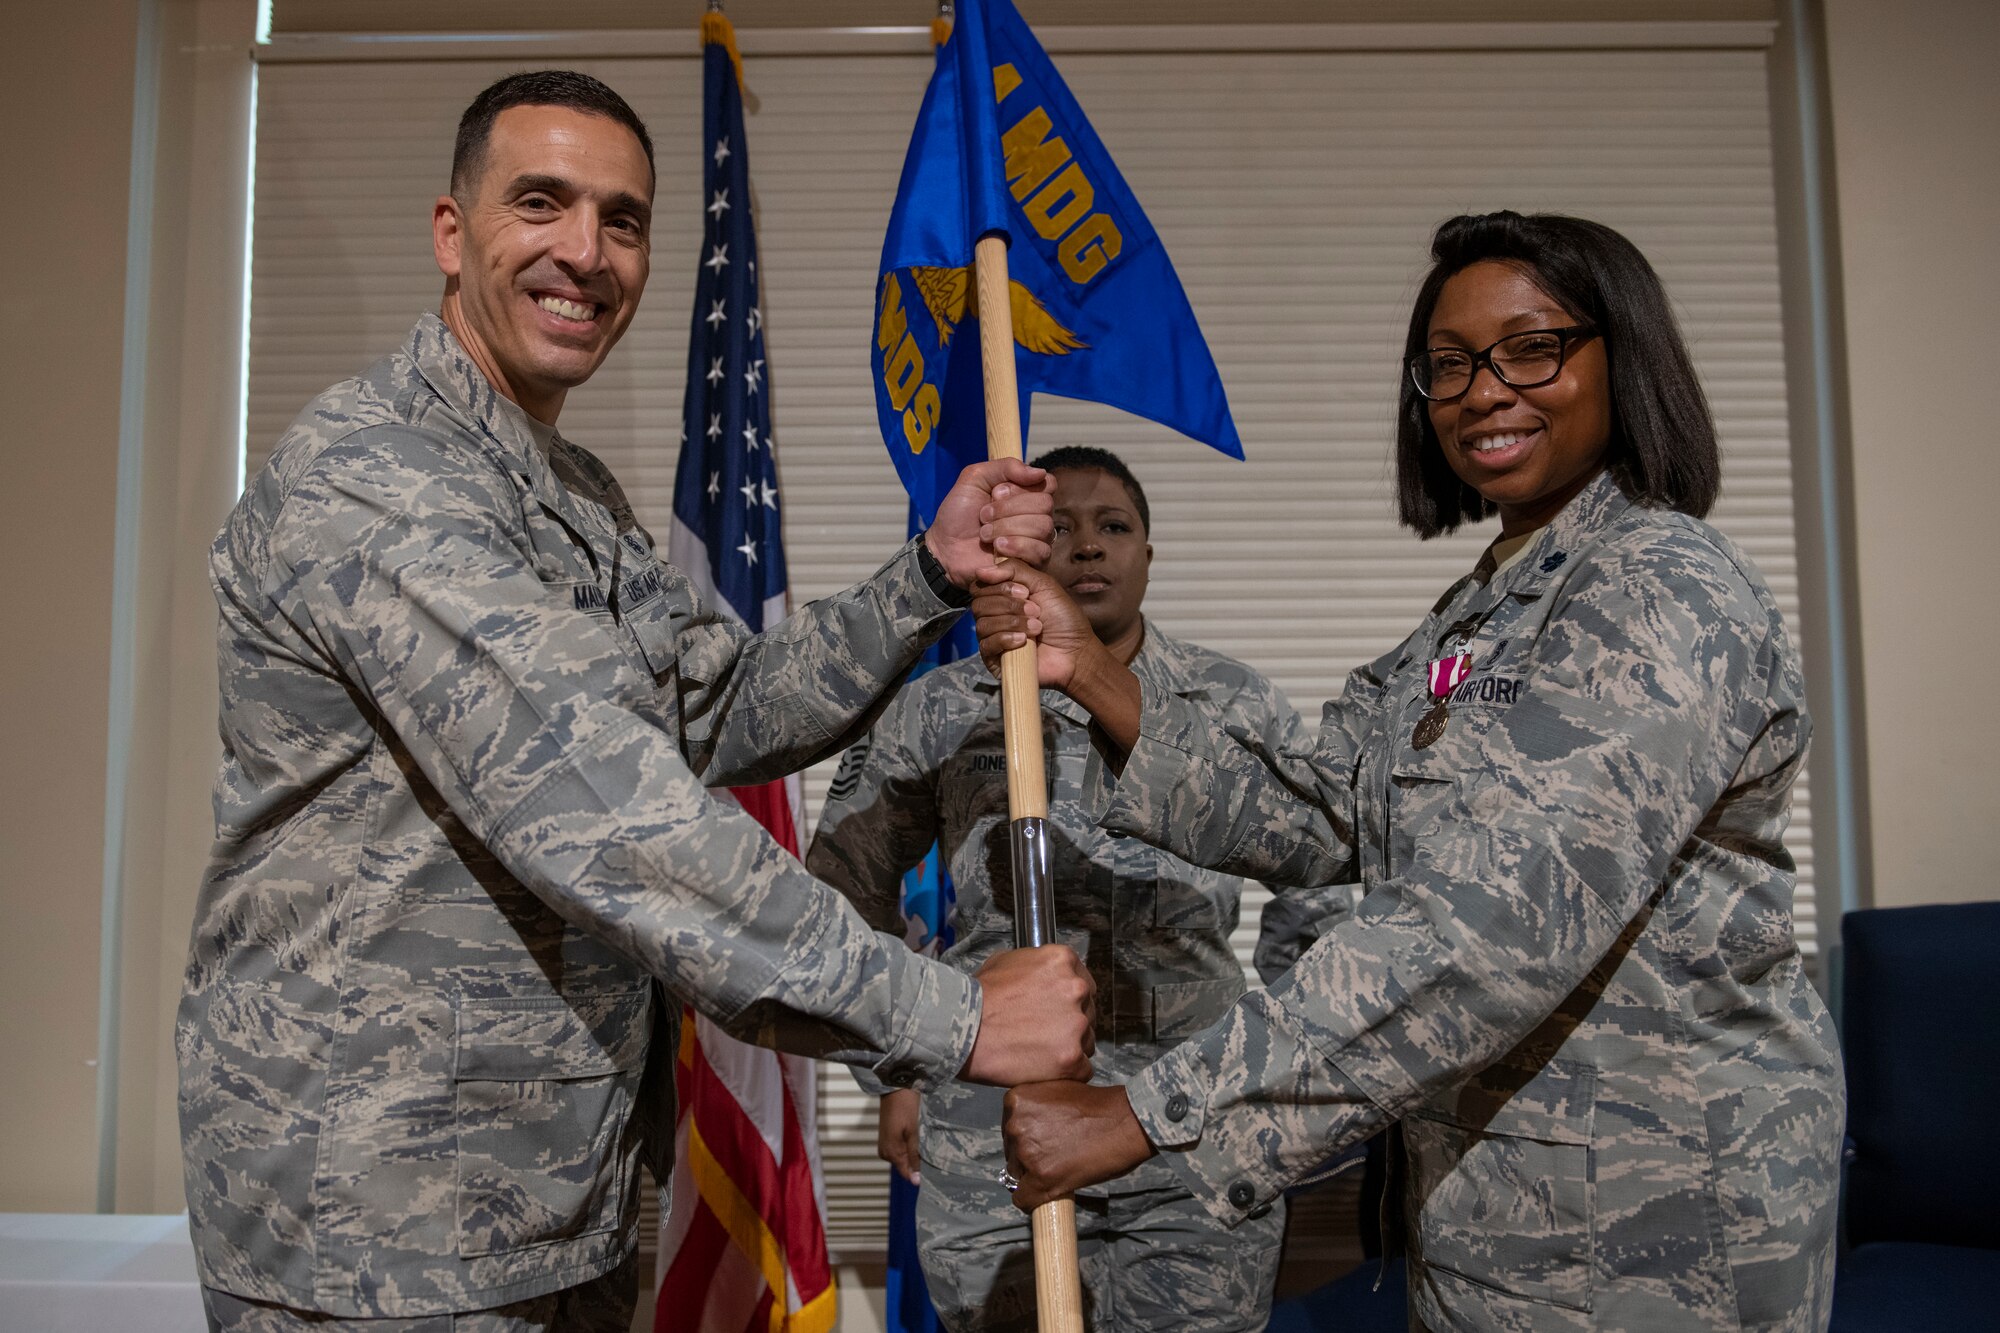 4 AMDS welcomes new commander